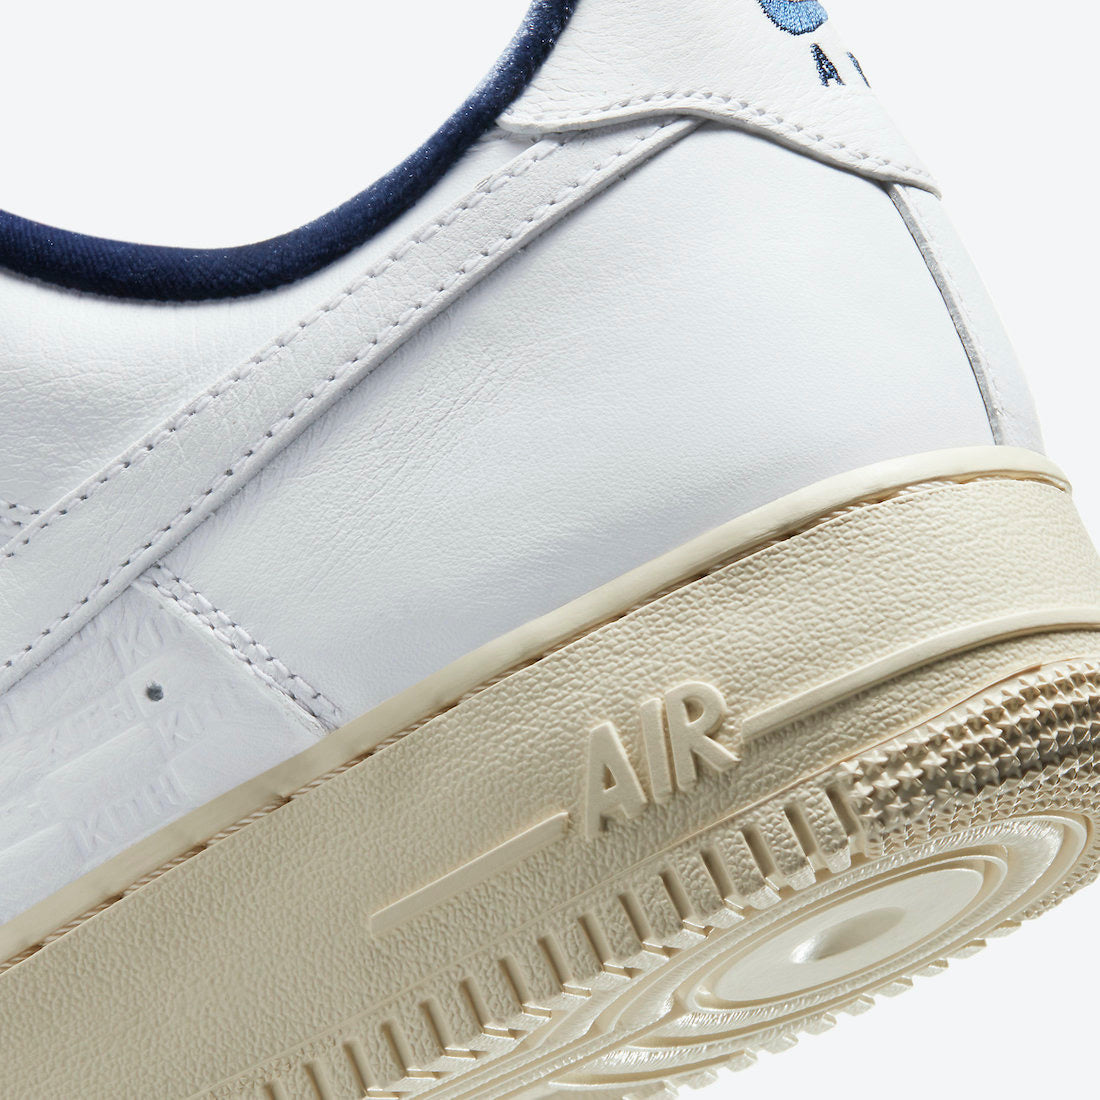 KITH x Nike Air Force 1 Low “France”